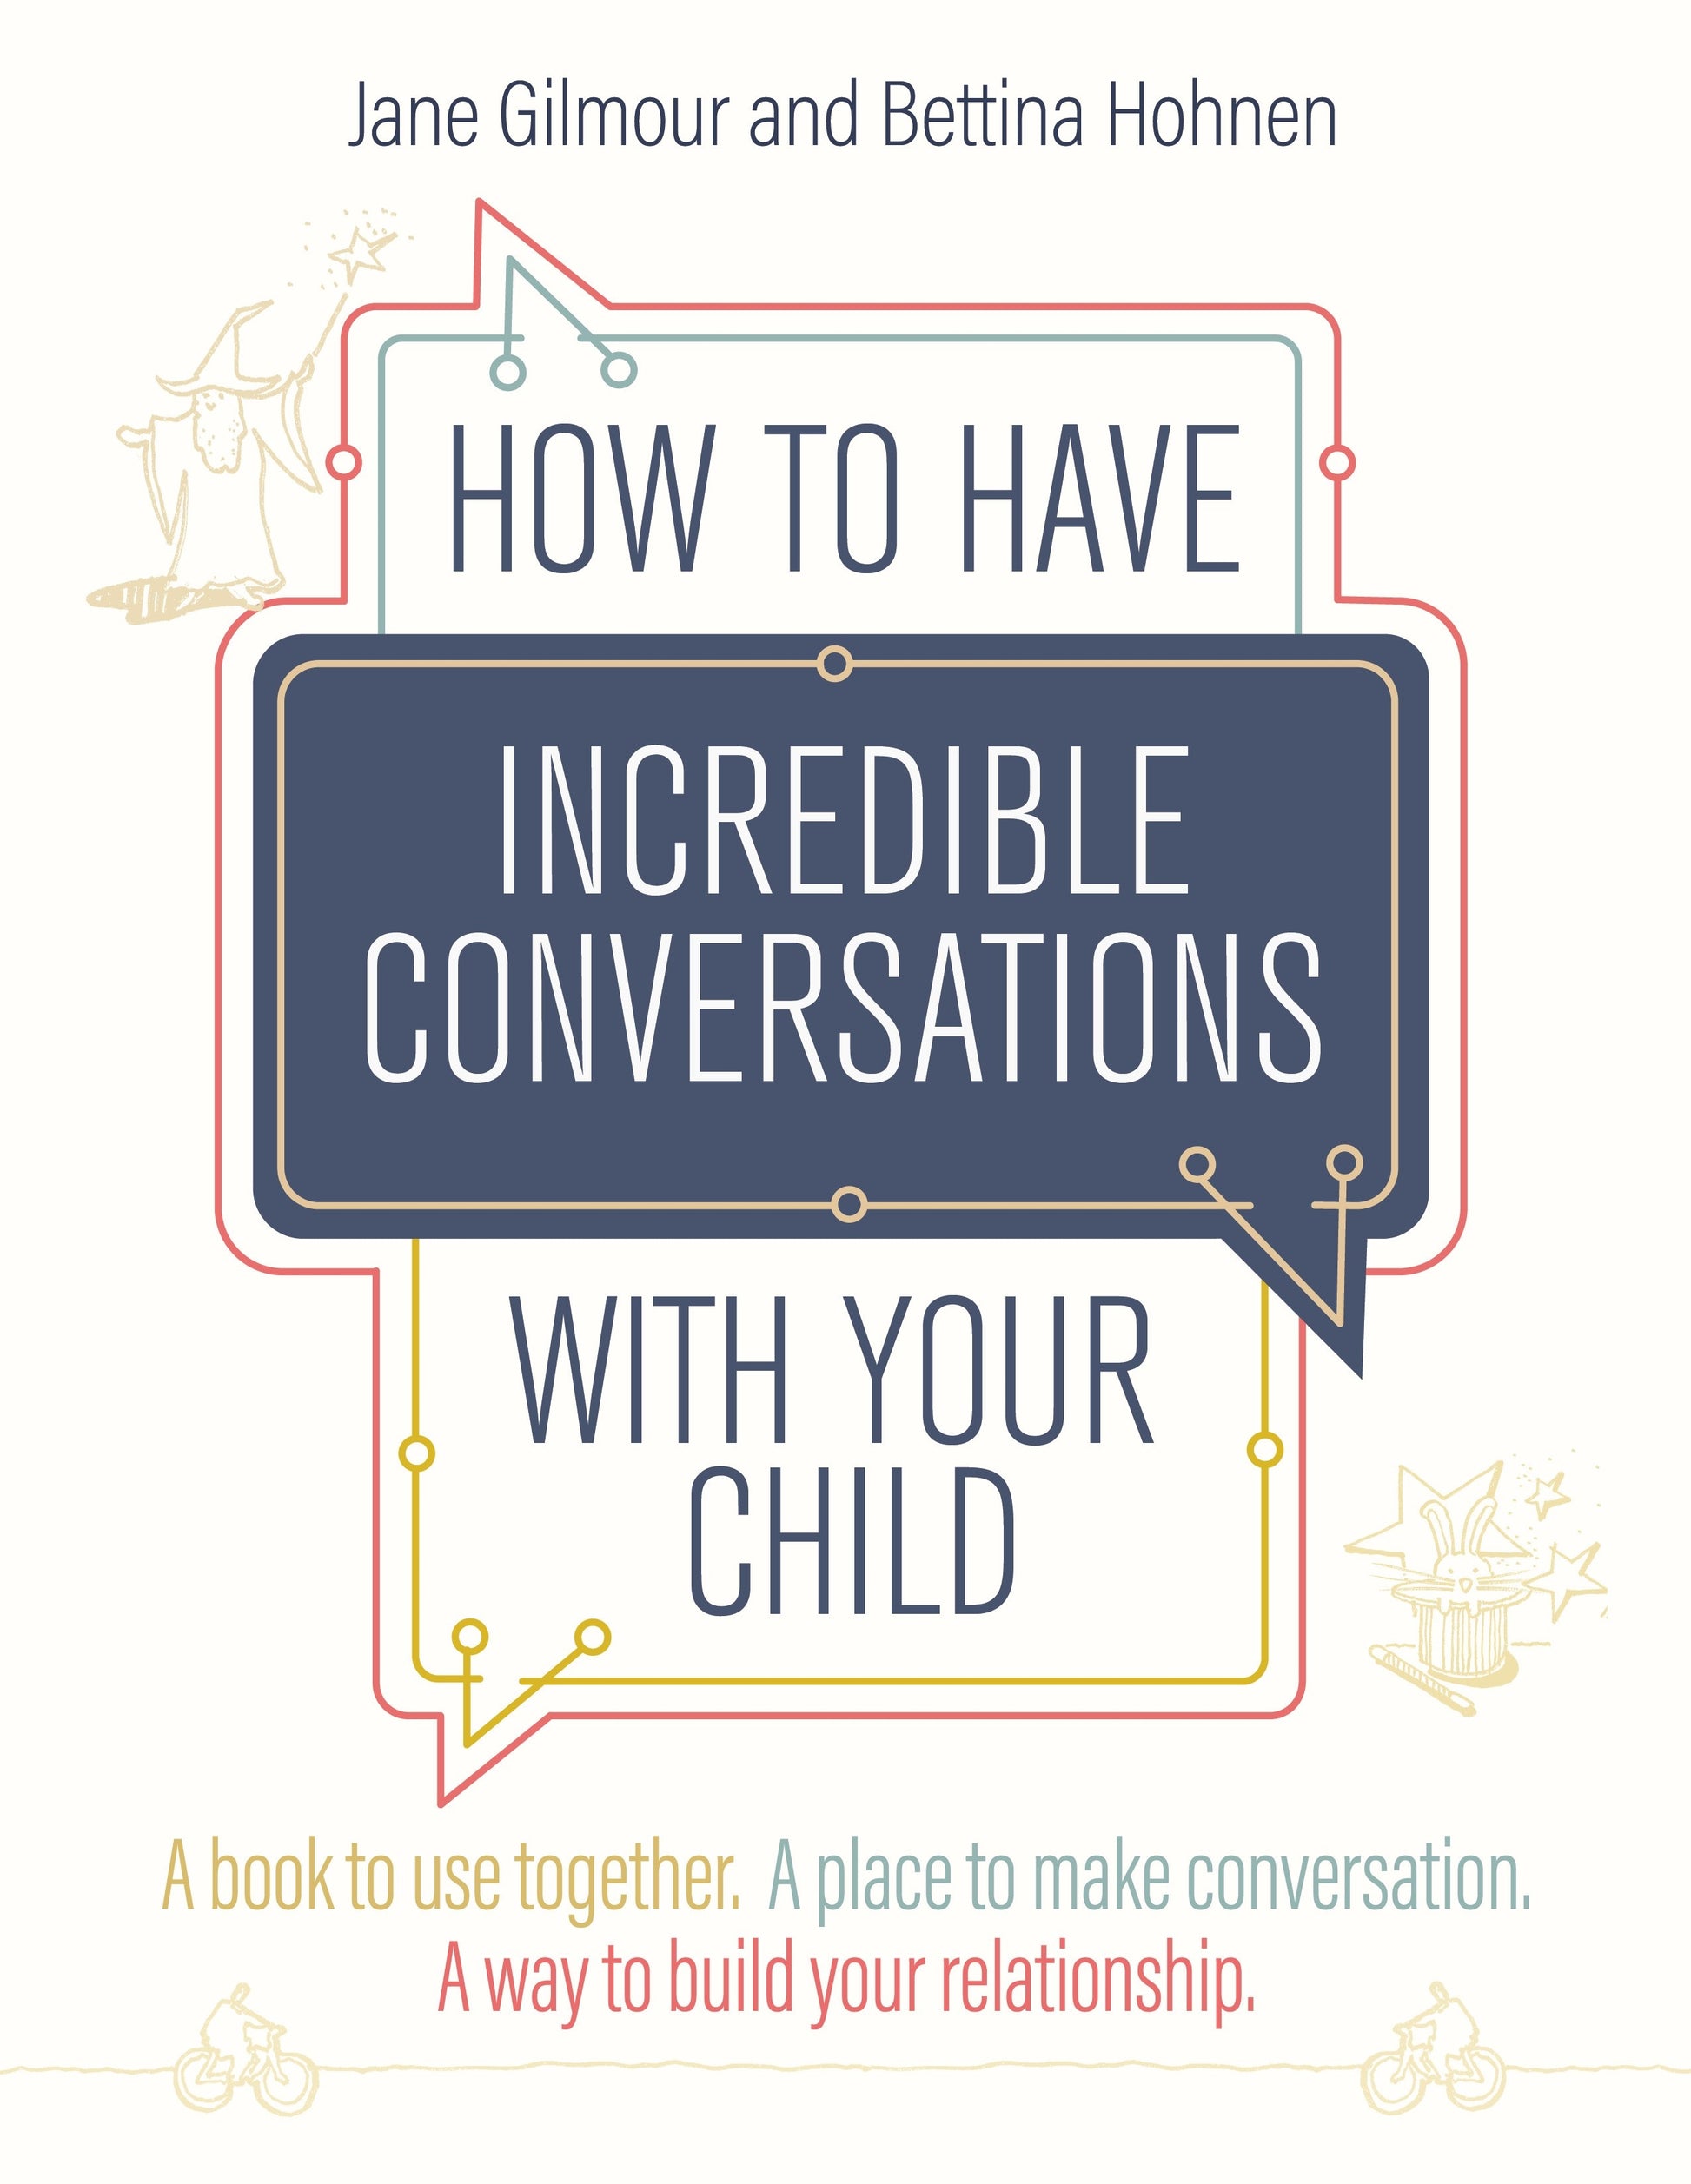 How to Have Incredible Conversations with your Child by Jane Gilmour, Bettina Hohnen